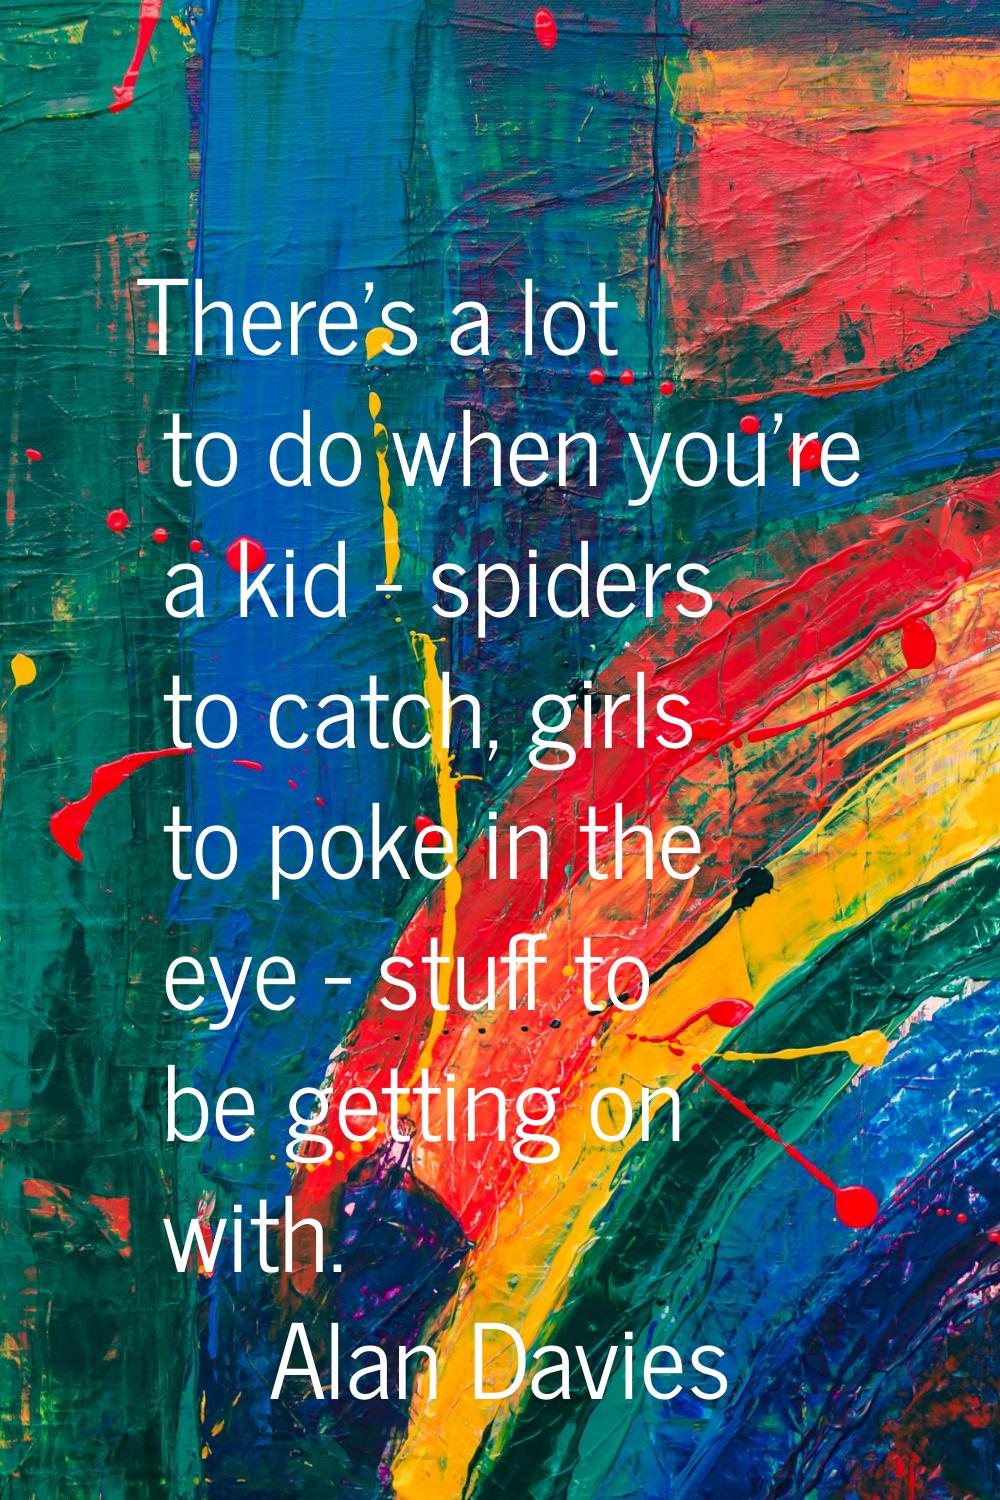 There's a lot to do when you're a kid - spiders to catch, girls to poke in the eye - stuff to be ge